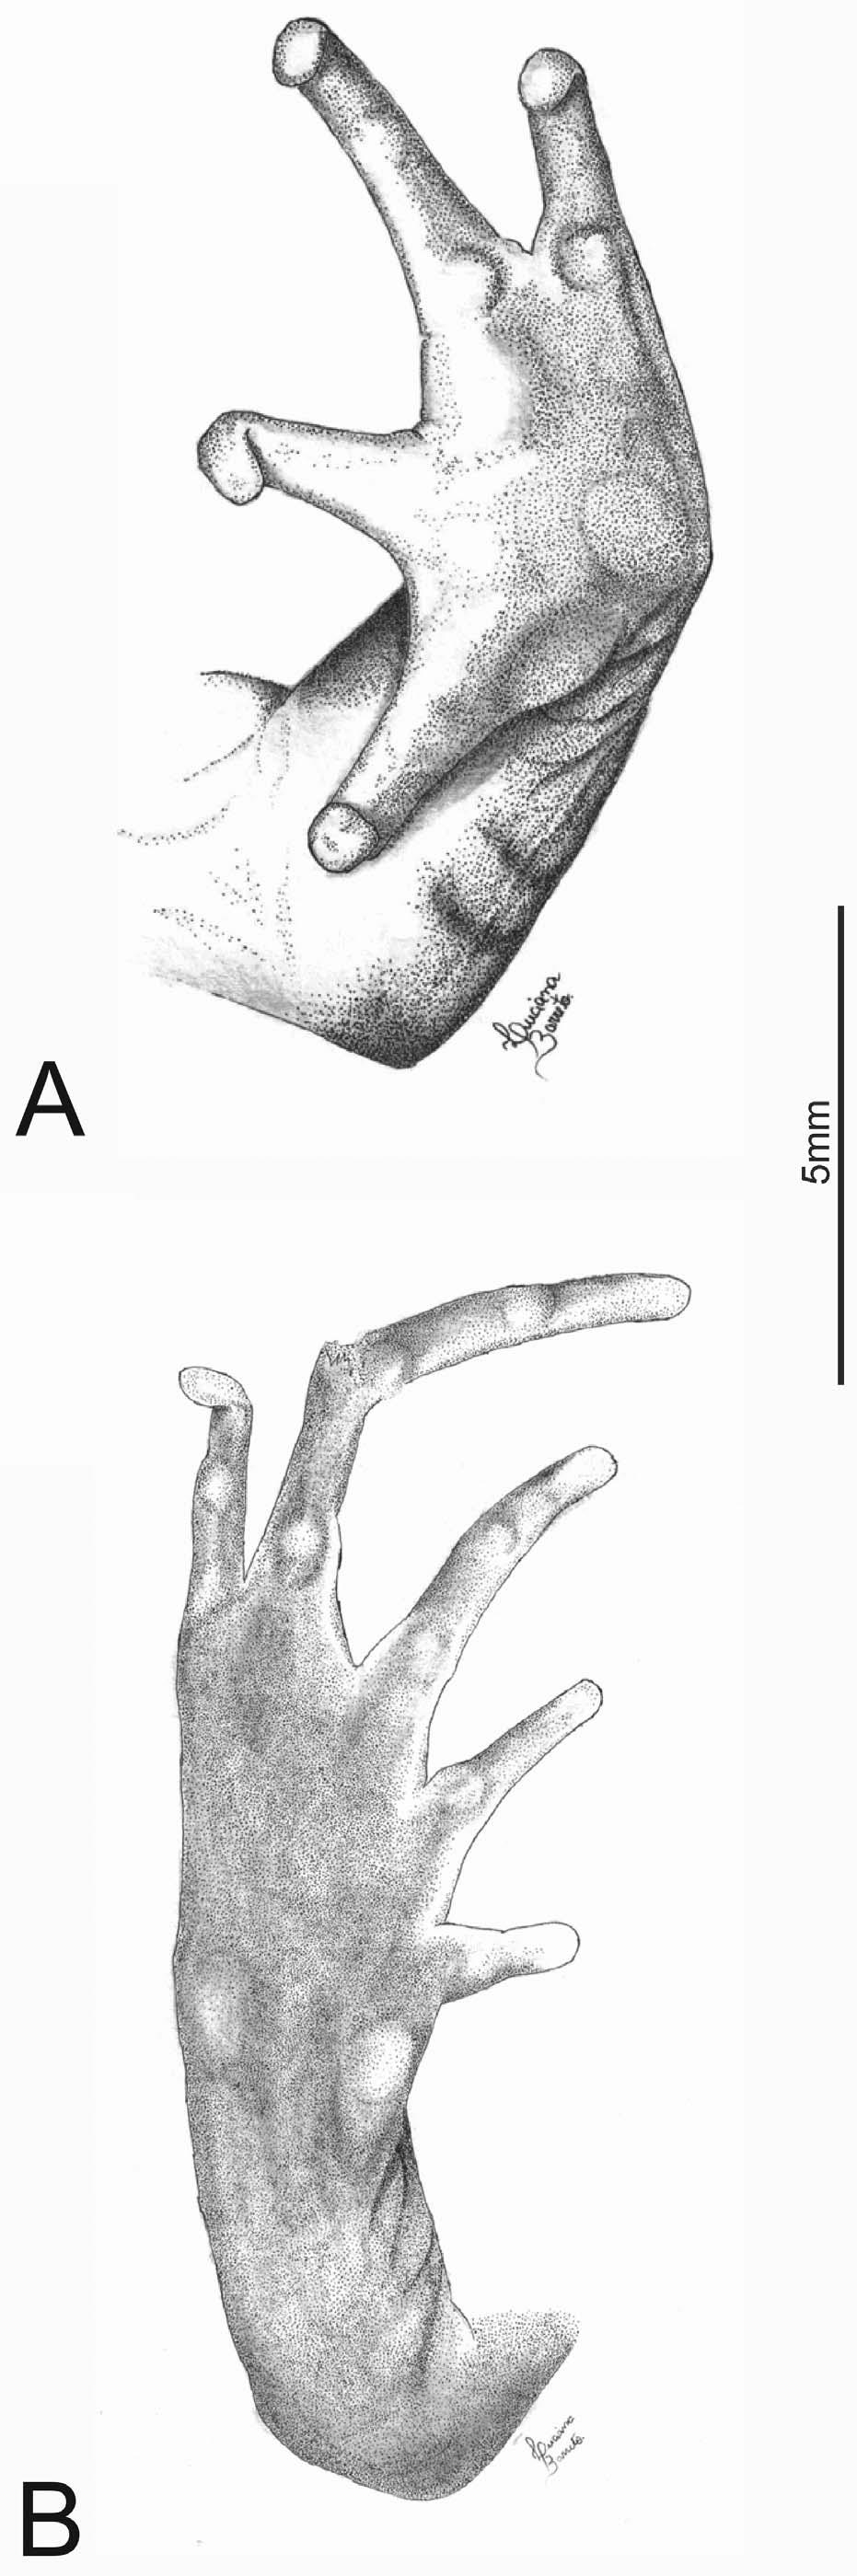 MOTTA ET AL. PHYLOGENETICS AND TAXONOMY OF LYNCHIUS 129 FIG. 5. Lynchius oblitus sp. nov. Ventral views of left hand (A) and right foot (B) of holotype (MHNC 8674).